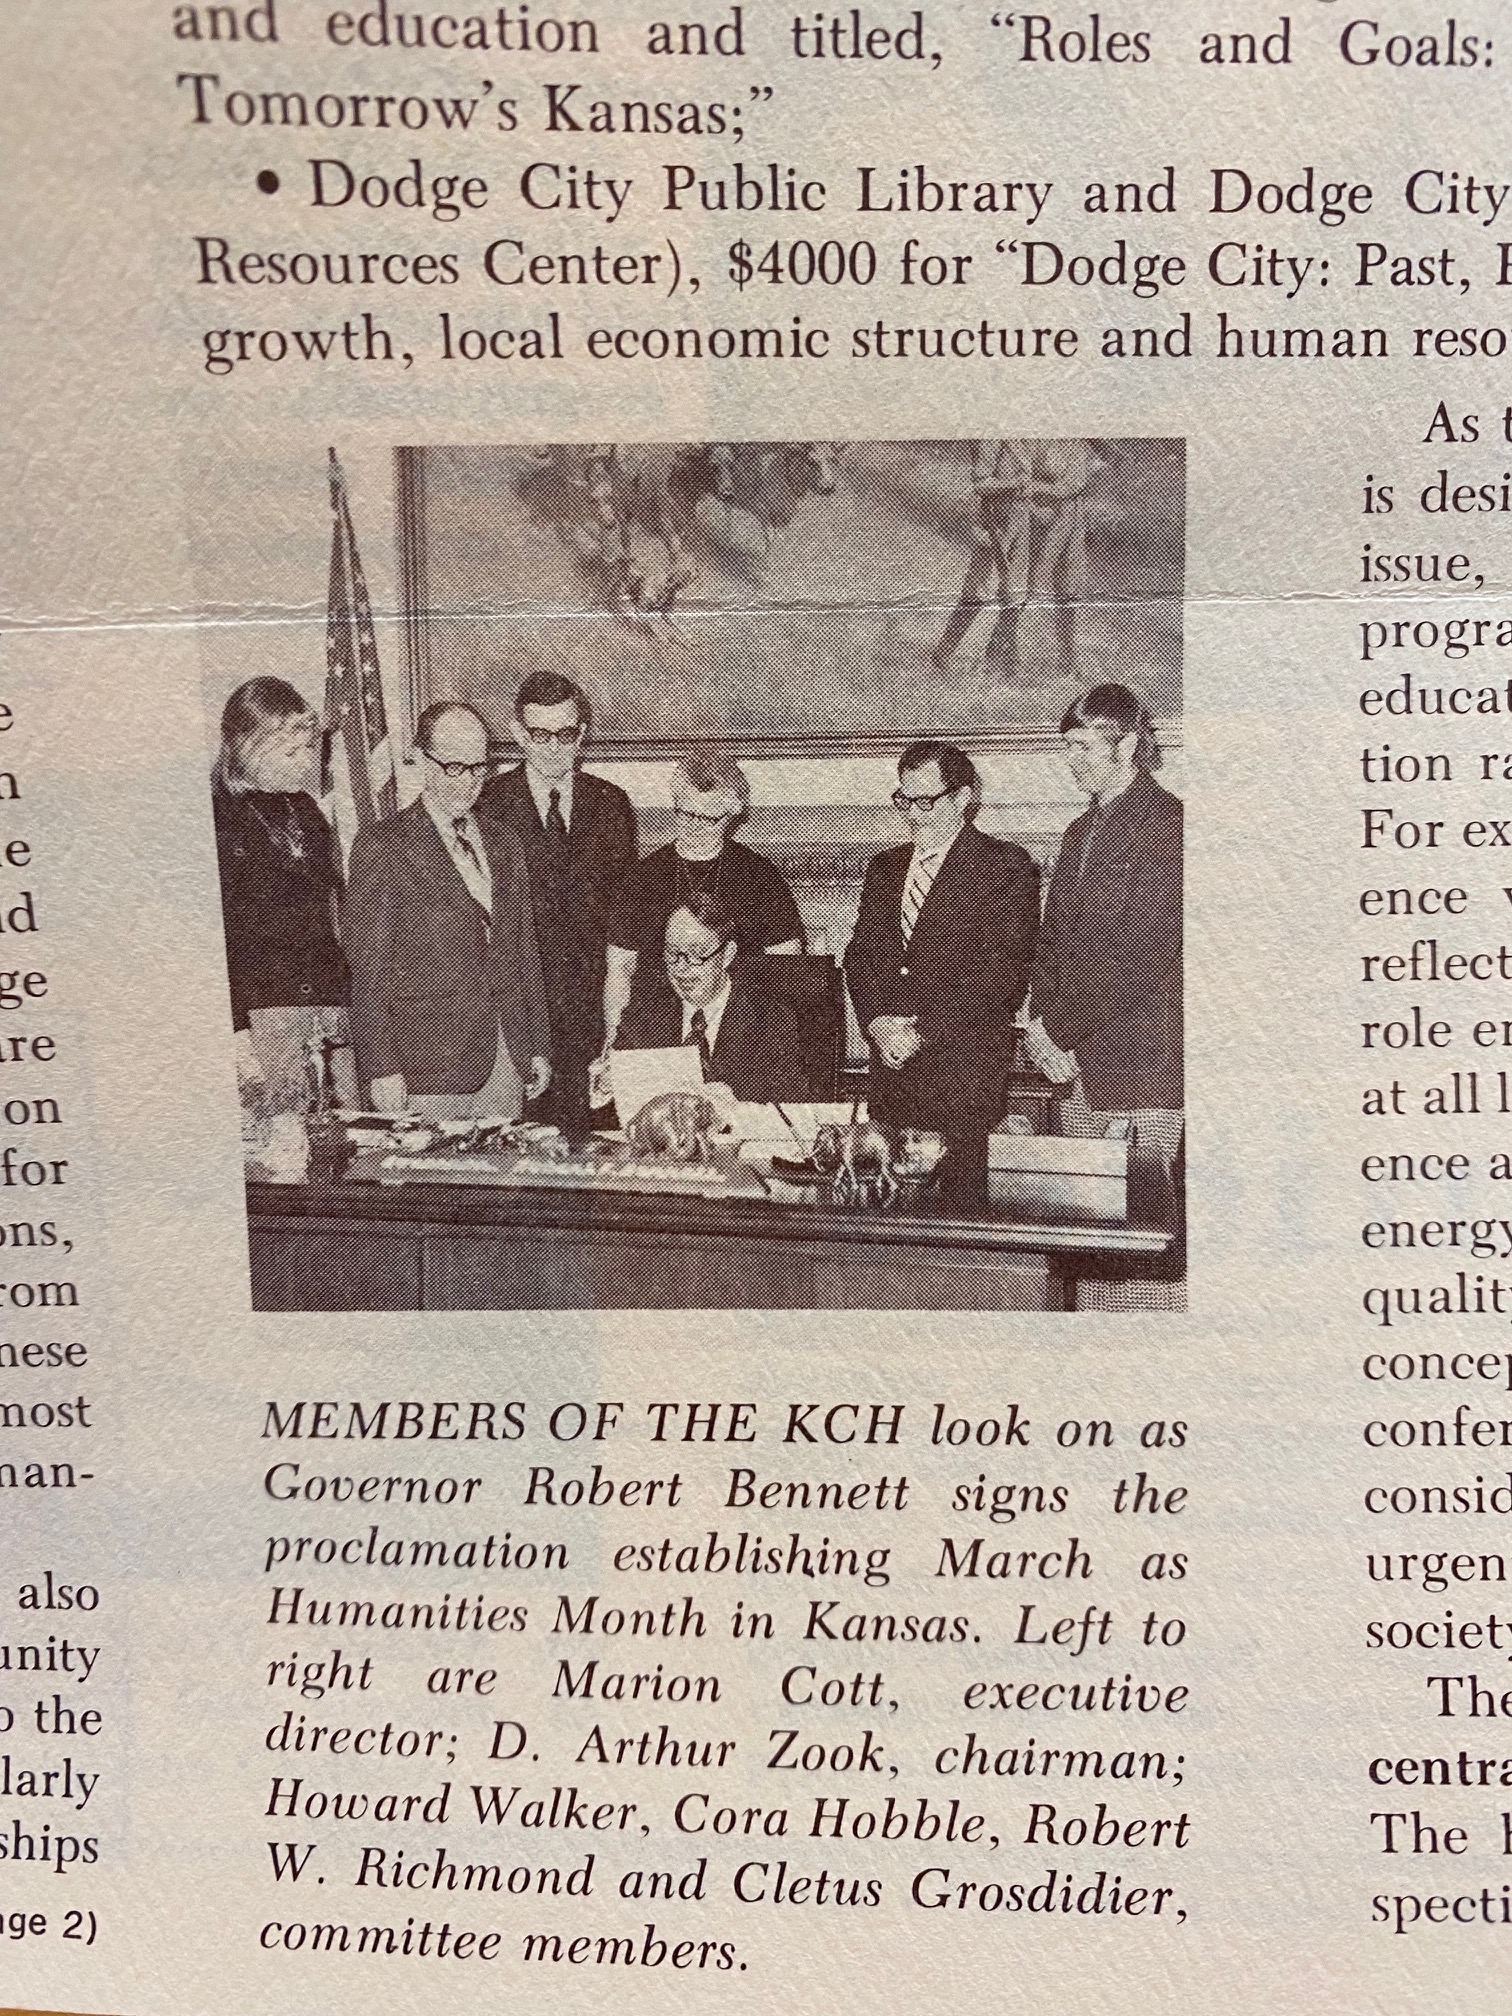 1975 Humanities Month Proclamation signing